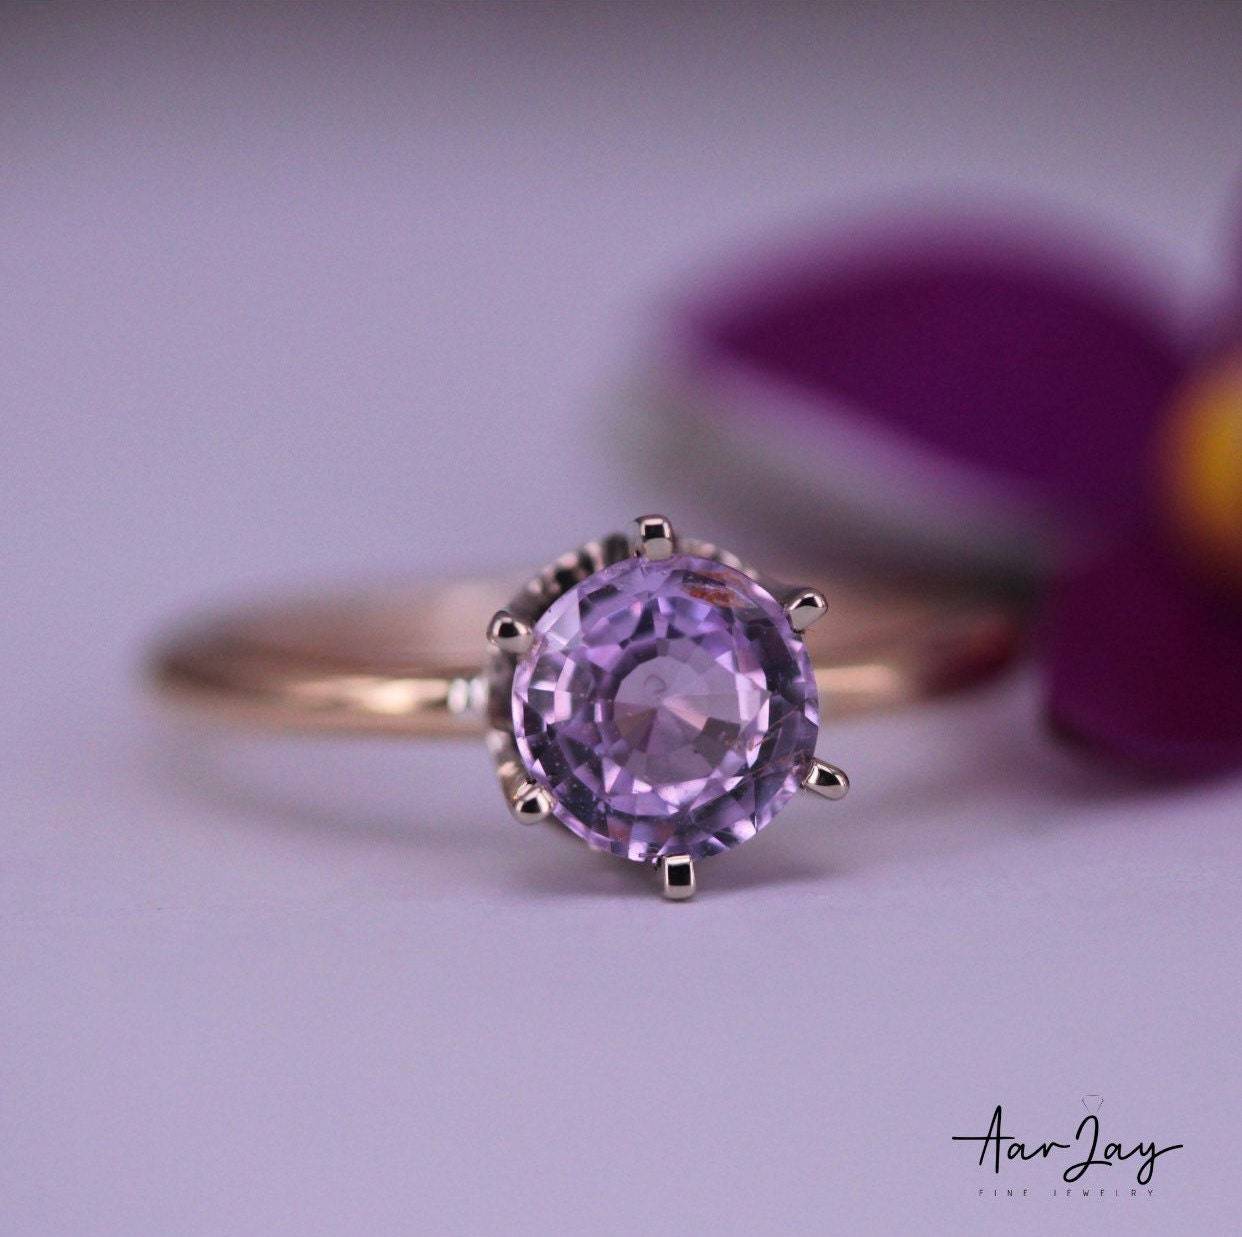 Unheated Lavender Sapphire White Gold Ring - 1.24 Cts, Natural Purple Sapphire - Baza Boutique 